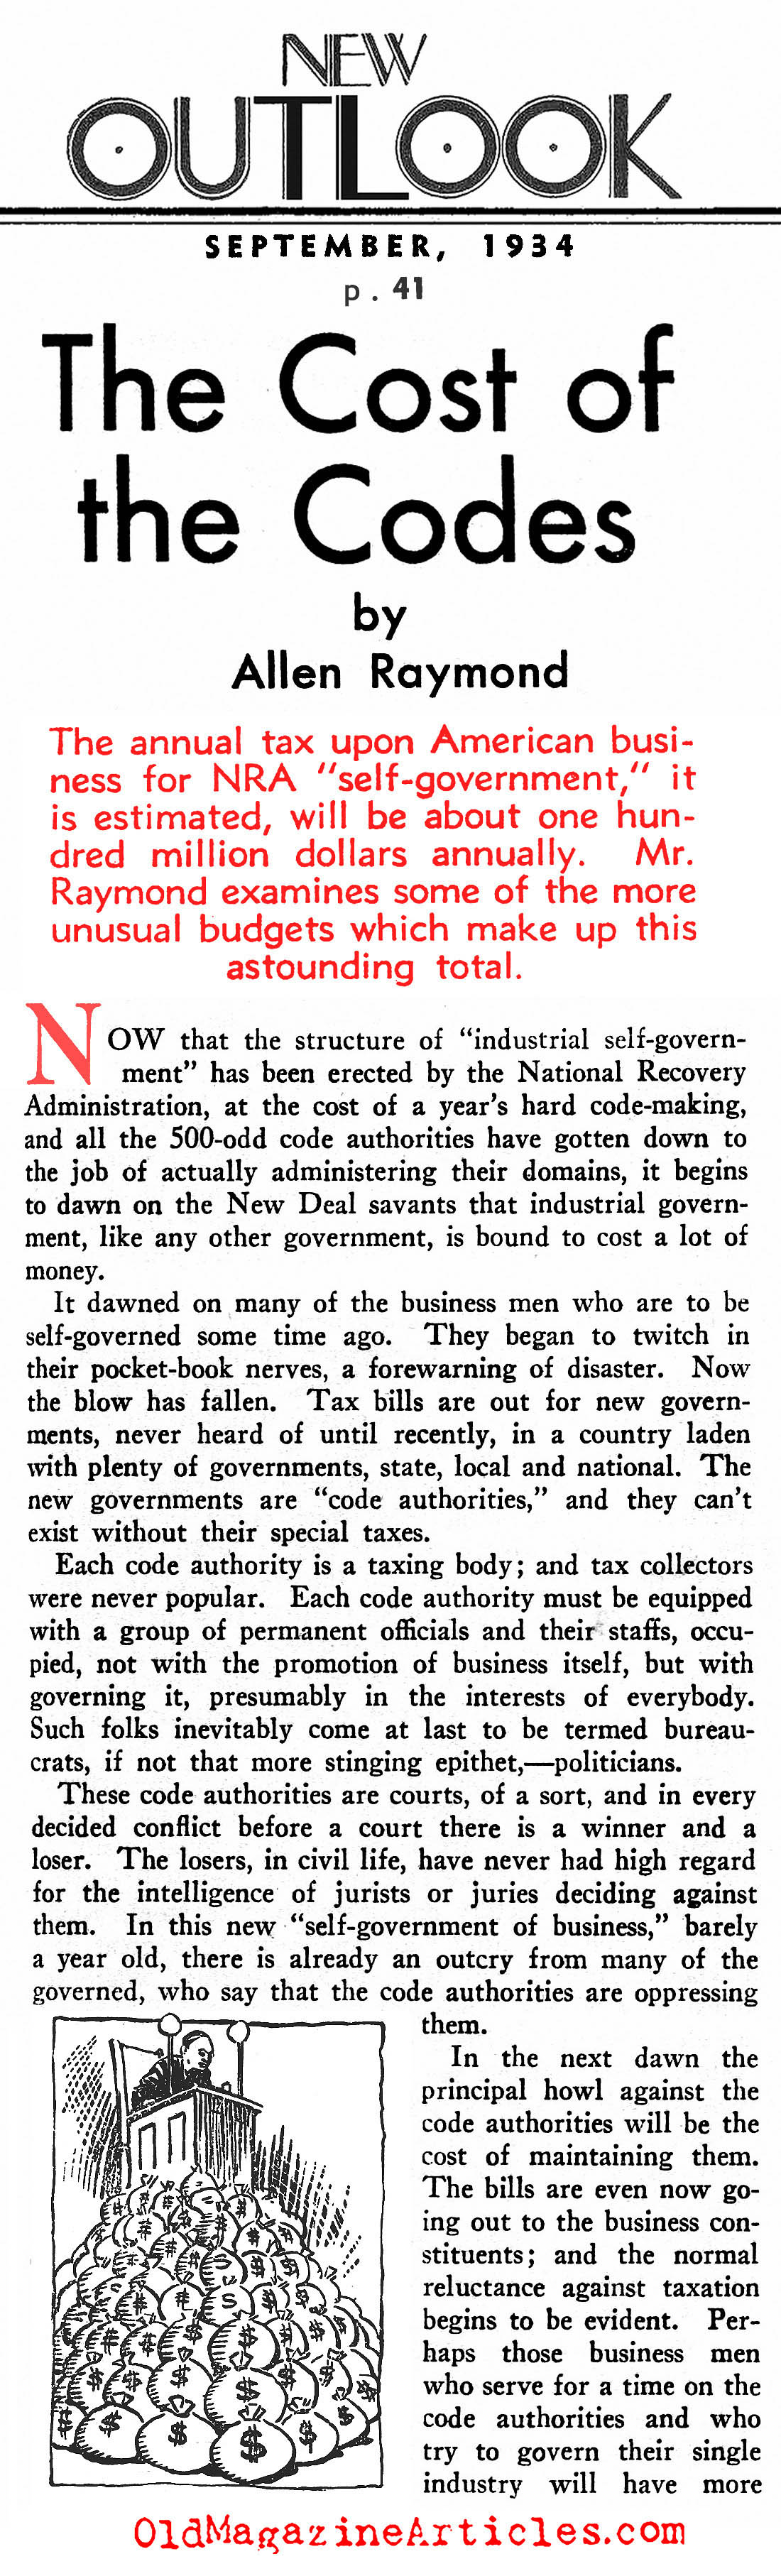 The Problem With Codes (New Outlook, 1934)